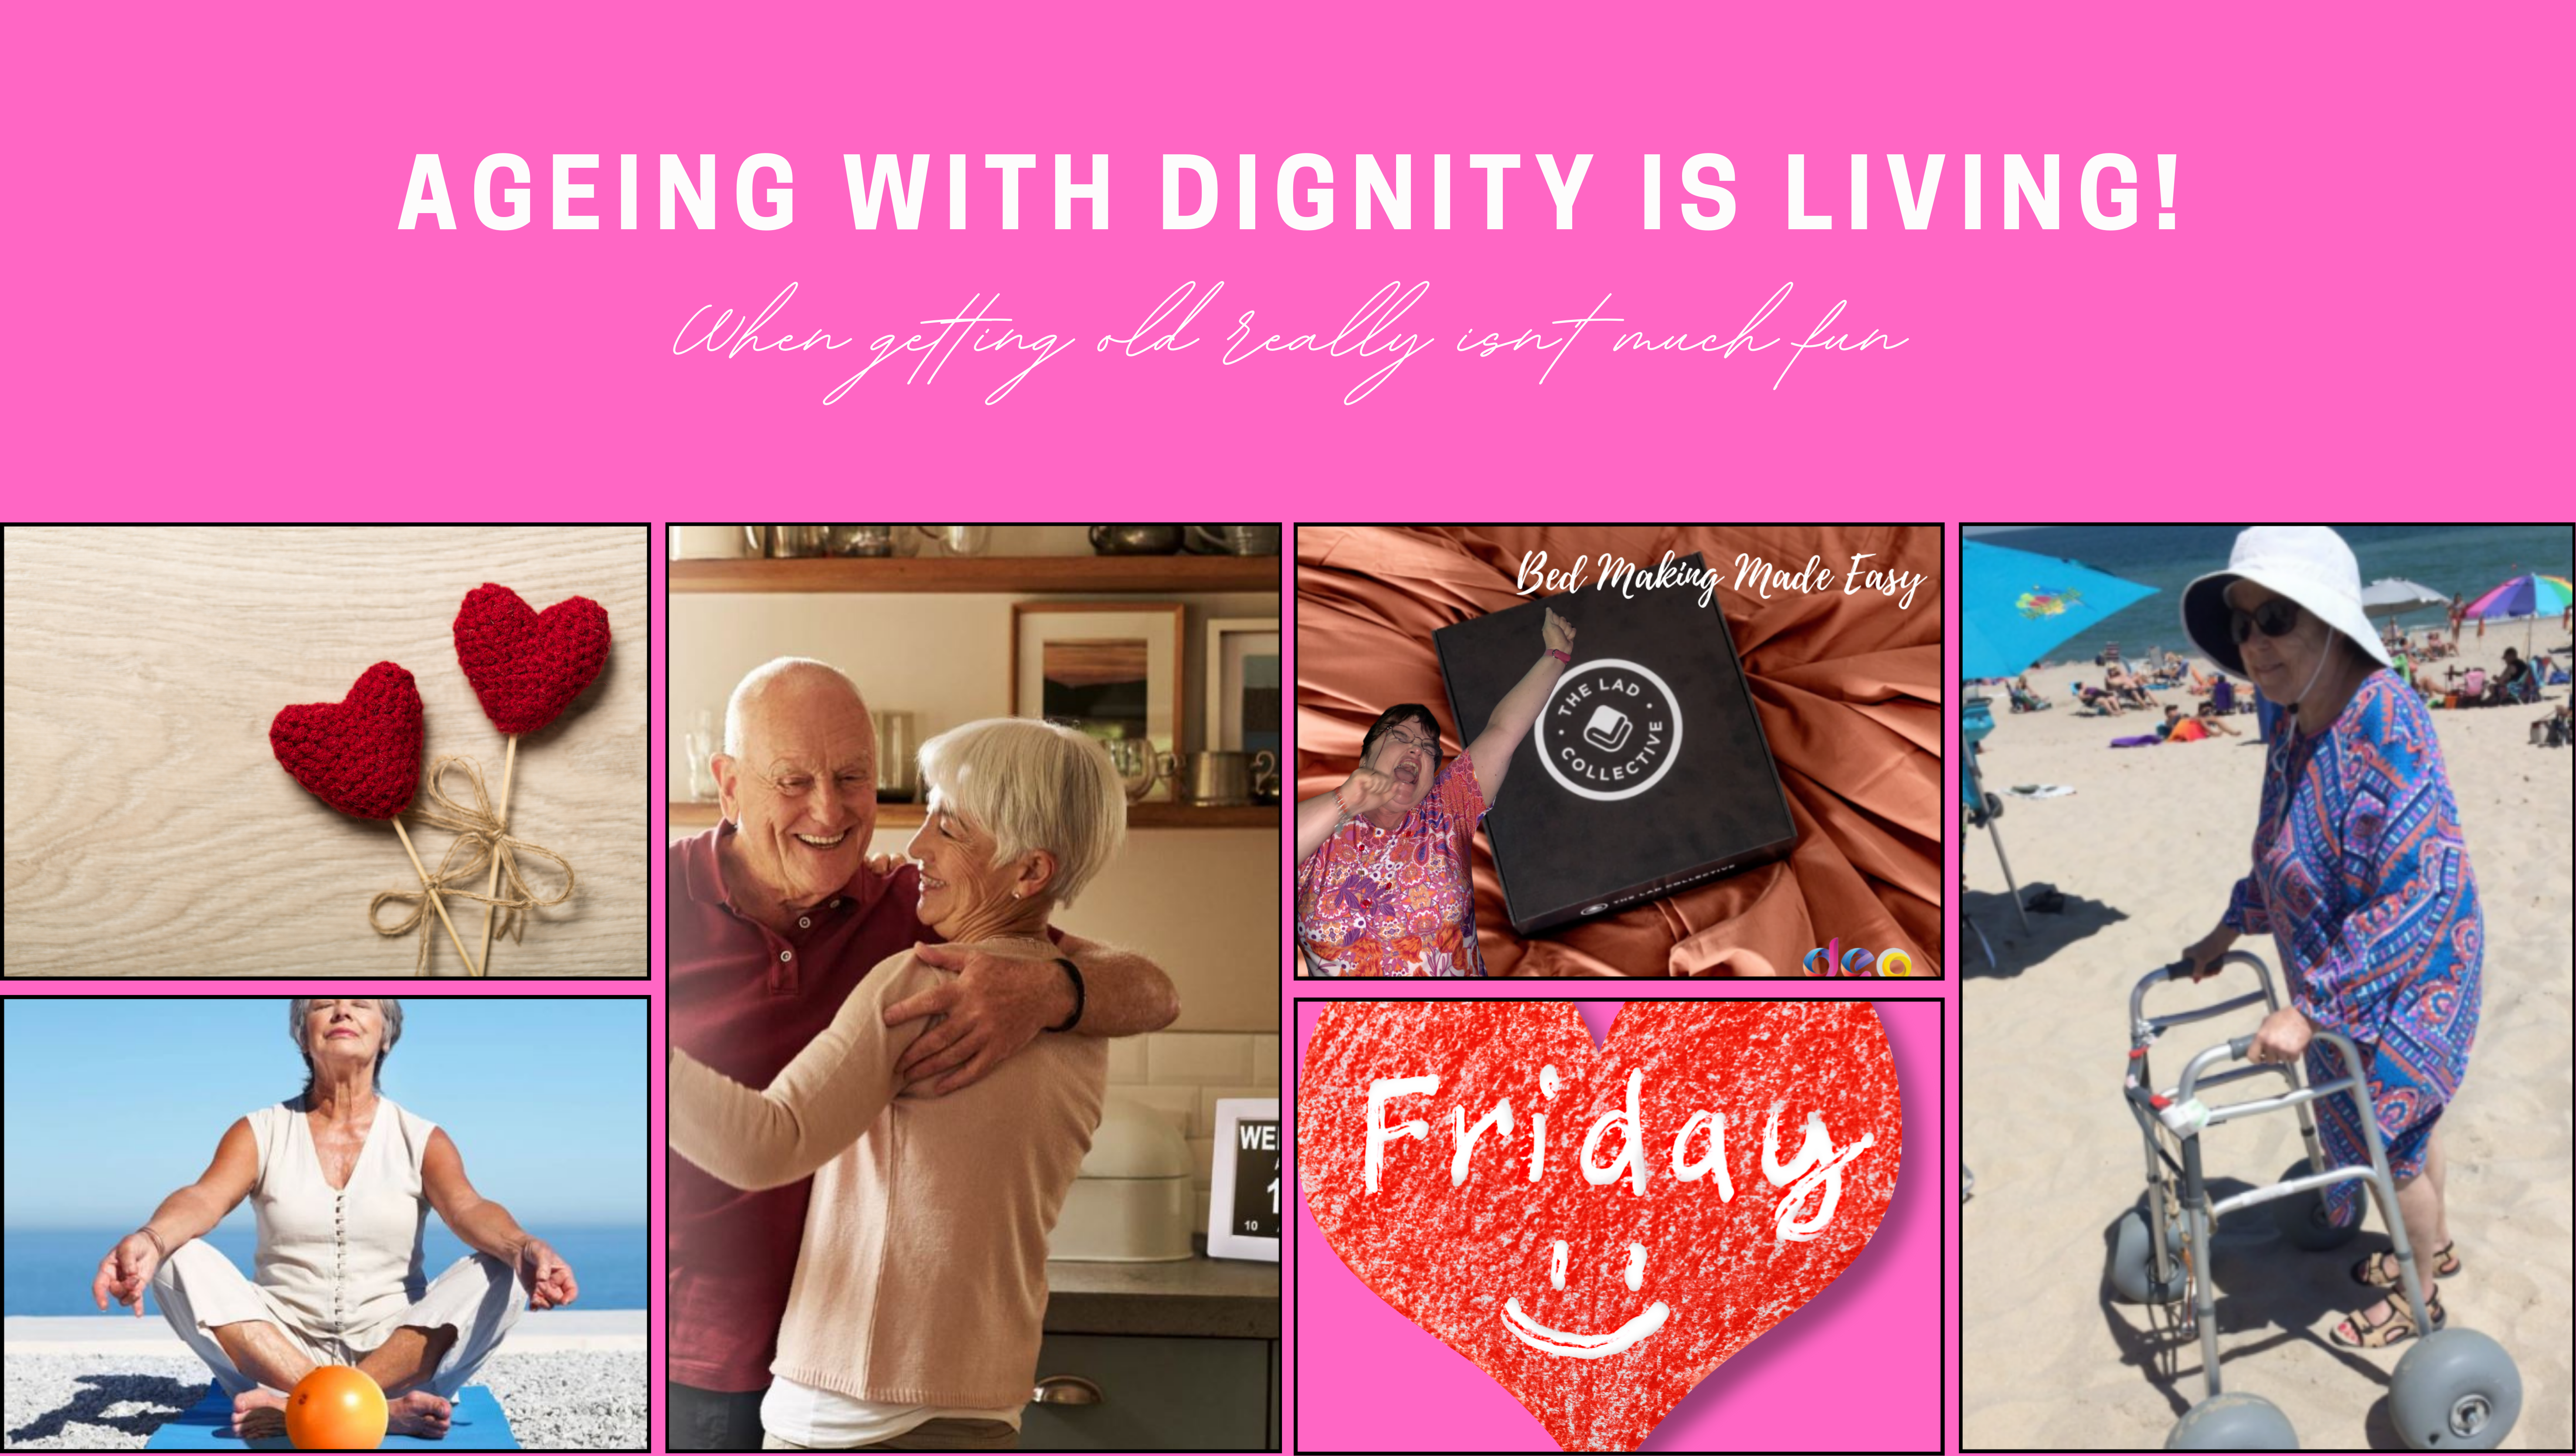 “Getting Old Really Isn’t Much Fun” - Ageing with Dignity is Living!